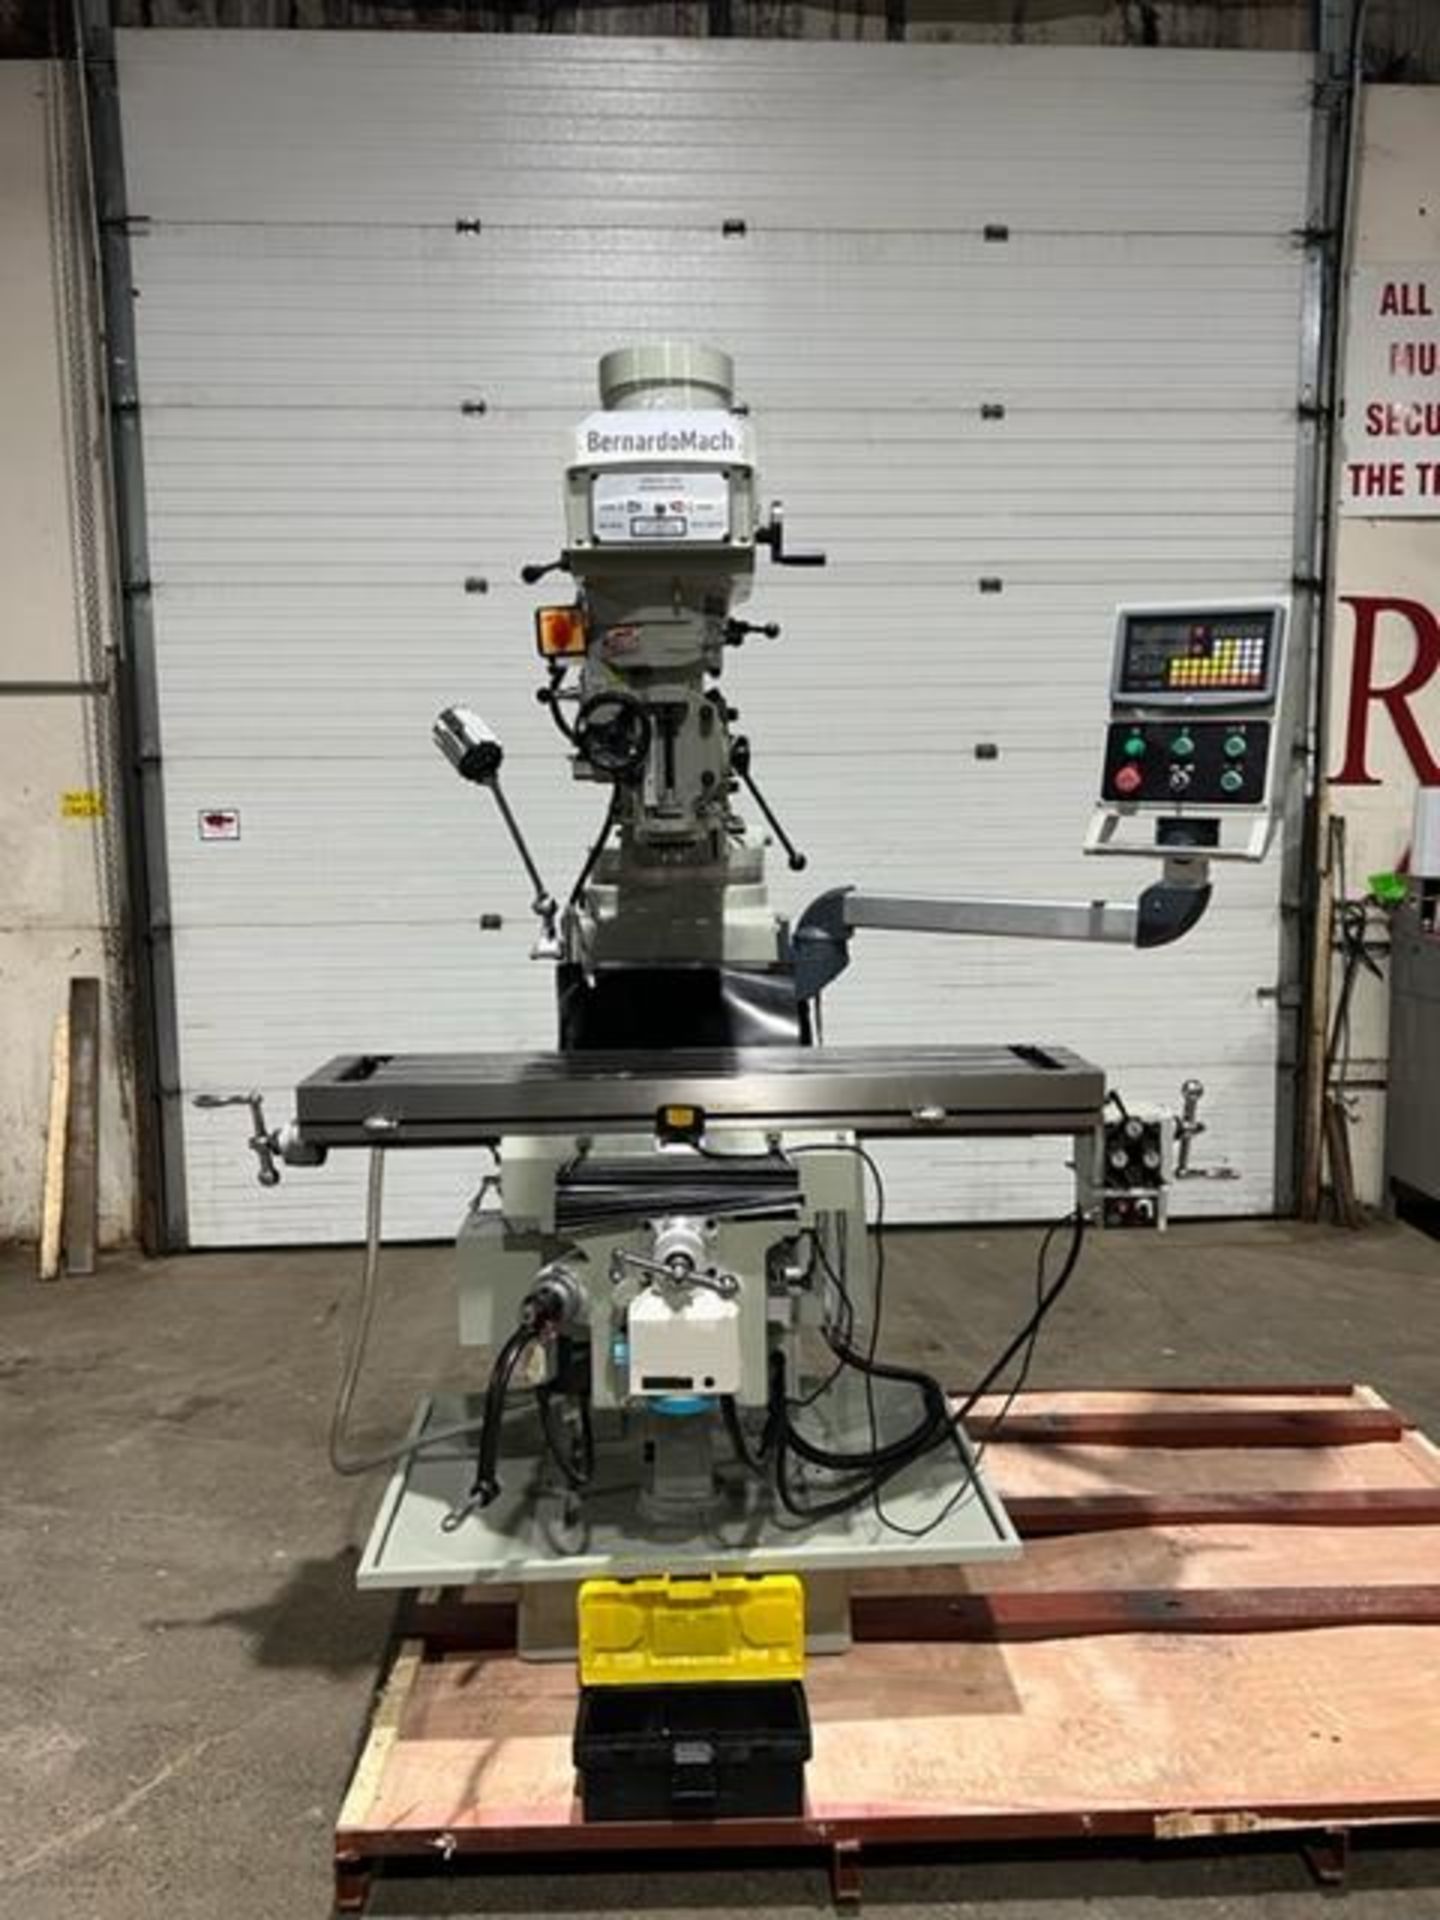 BernardoMach MINT / UNUSED Milling Machine with Full Power Feed Table on ALL AXIS (X, Y and Z) 54" x